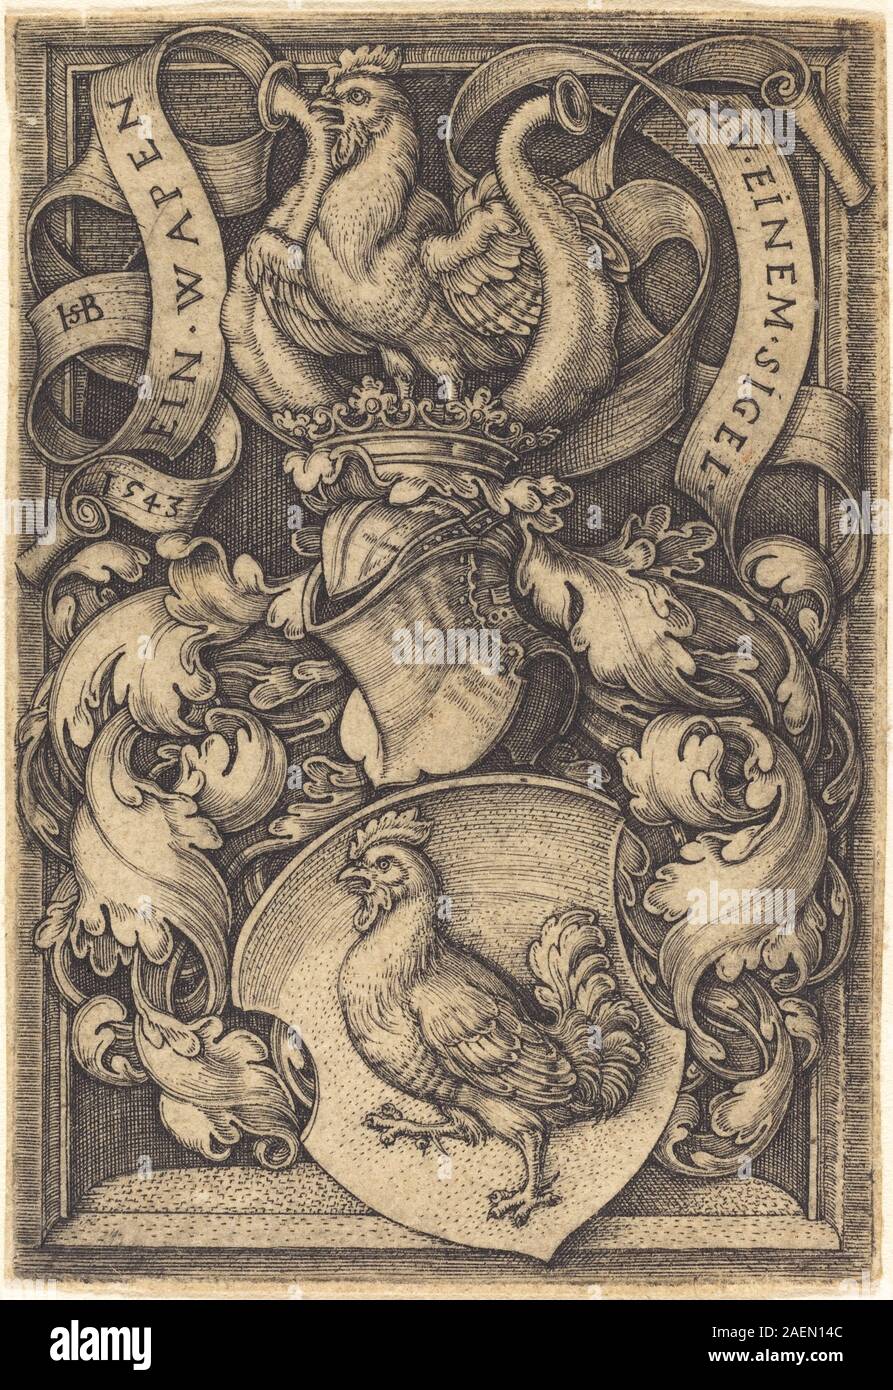 Sebald Beham, Coat of Arms with a Cock, 1543, Coat of Arms with a Cock; 1543 date Stock Photo